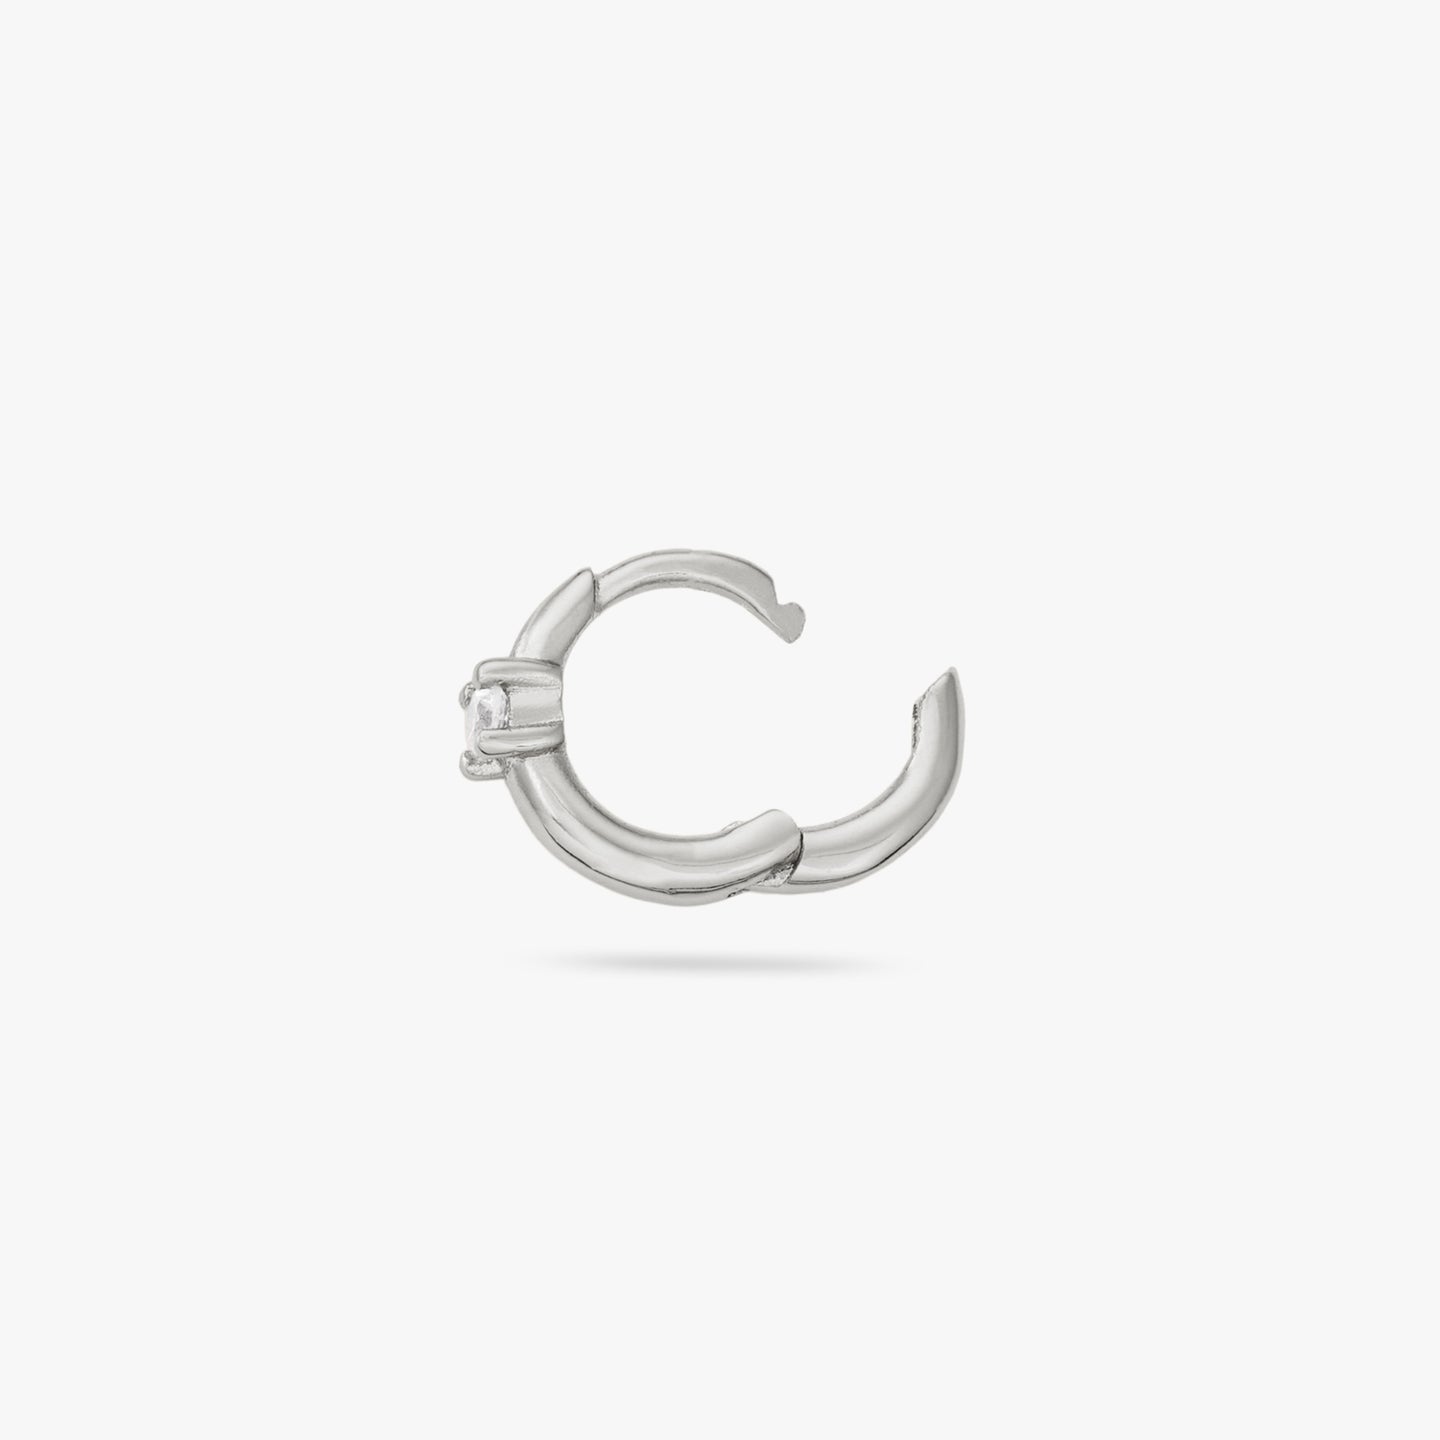 This is a small silver huggie with a clear cz detail color:null|silver/clear